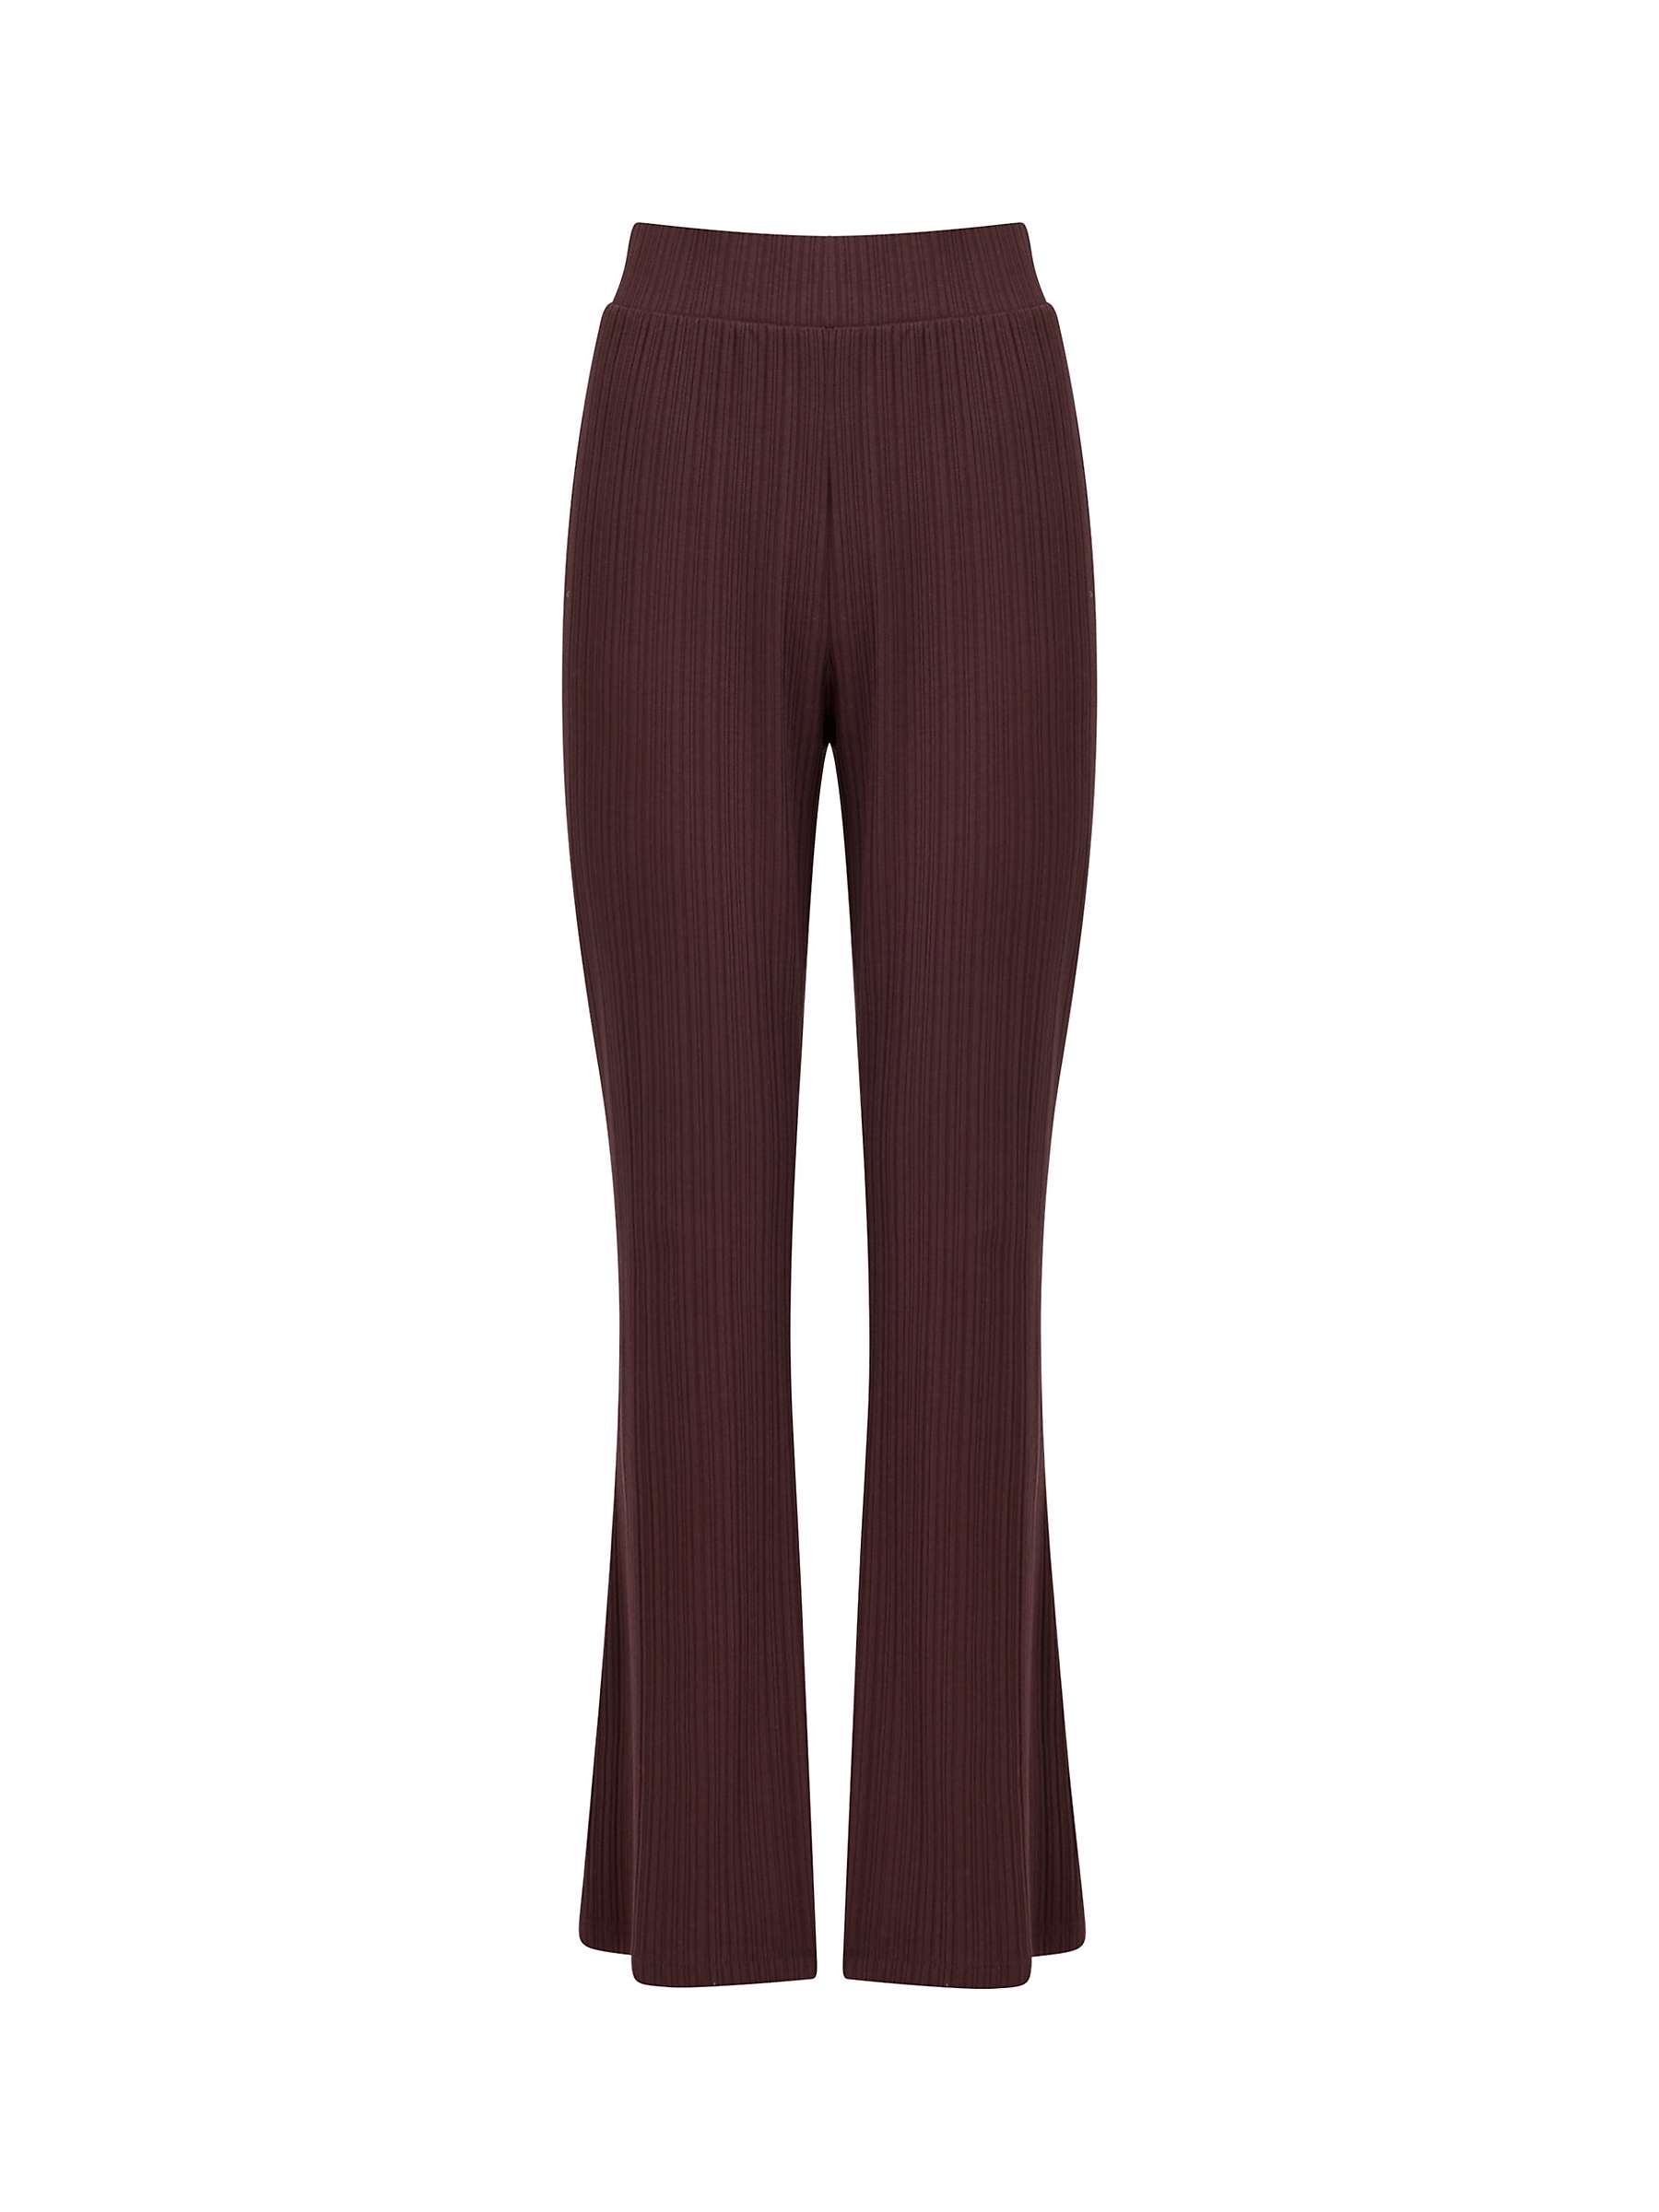 Buy Great Plains Modern Rib Jersey Trousers, Cocoa Online at johnlewis.com